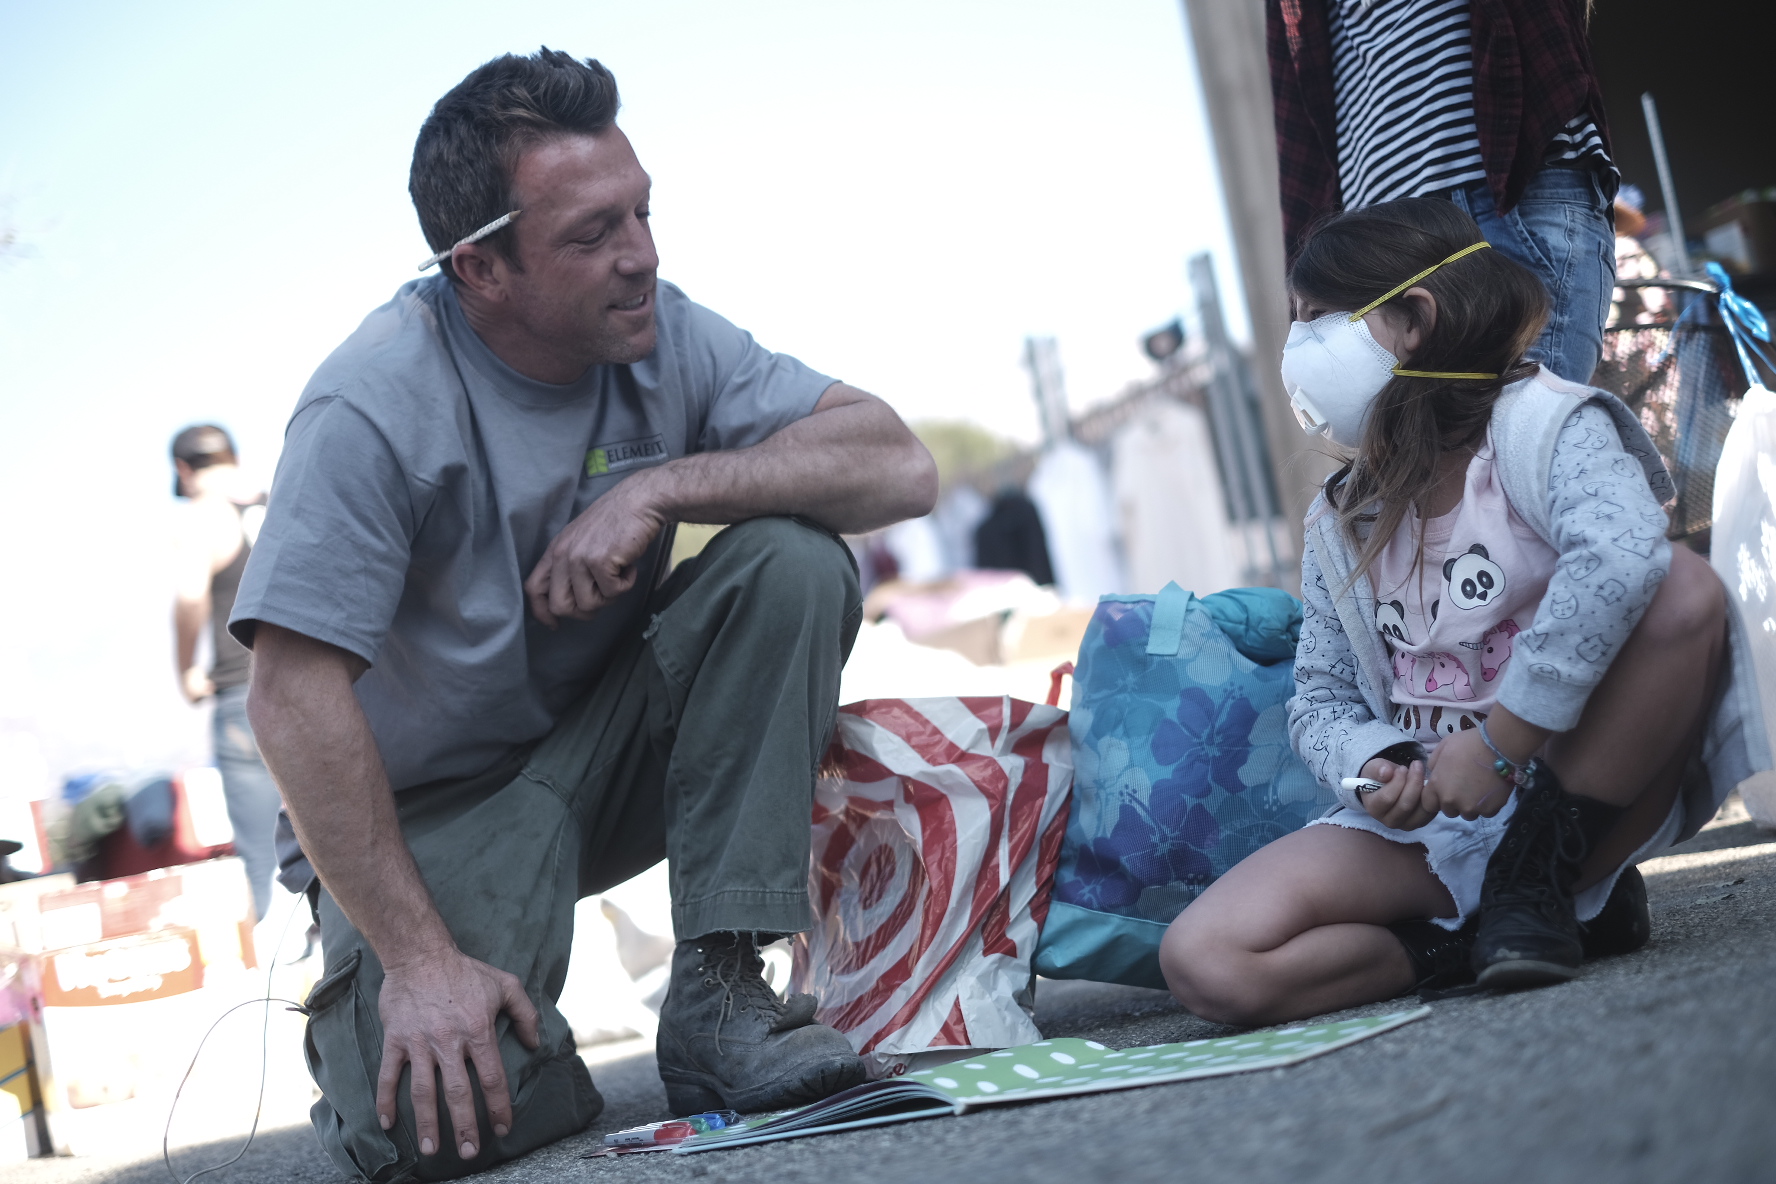 The Thomas Fire ripped through so many homes in December 2017. In response, “Help California” organized a toy drive. Here, a volunteer talks to a little girl who lost everything. 
Photo: Dylan Gordon
